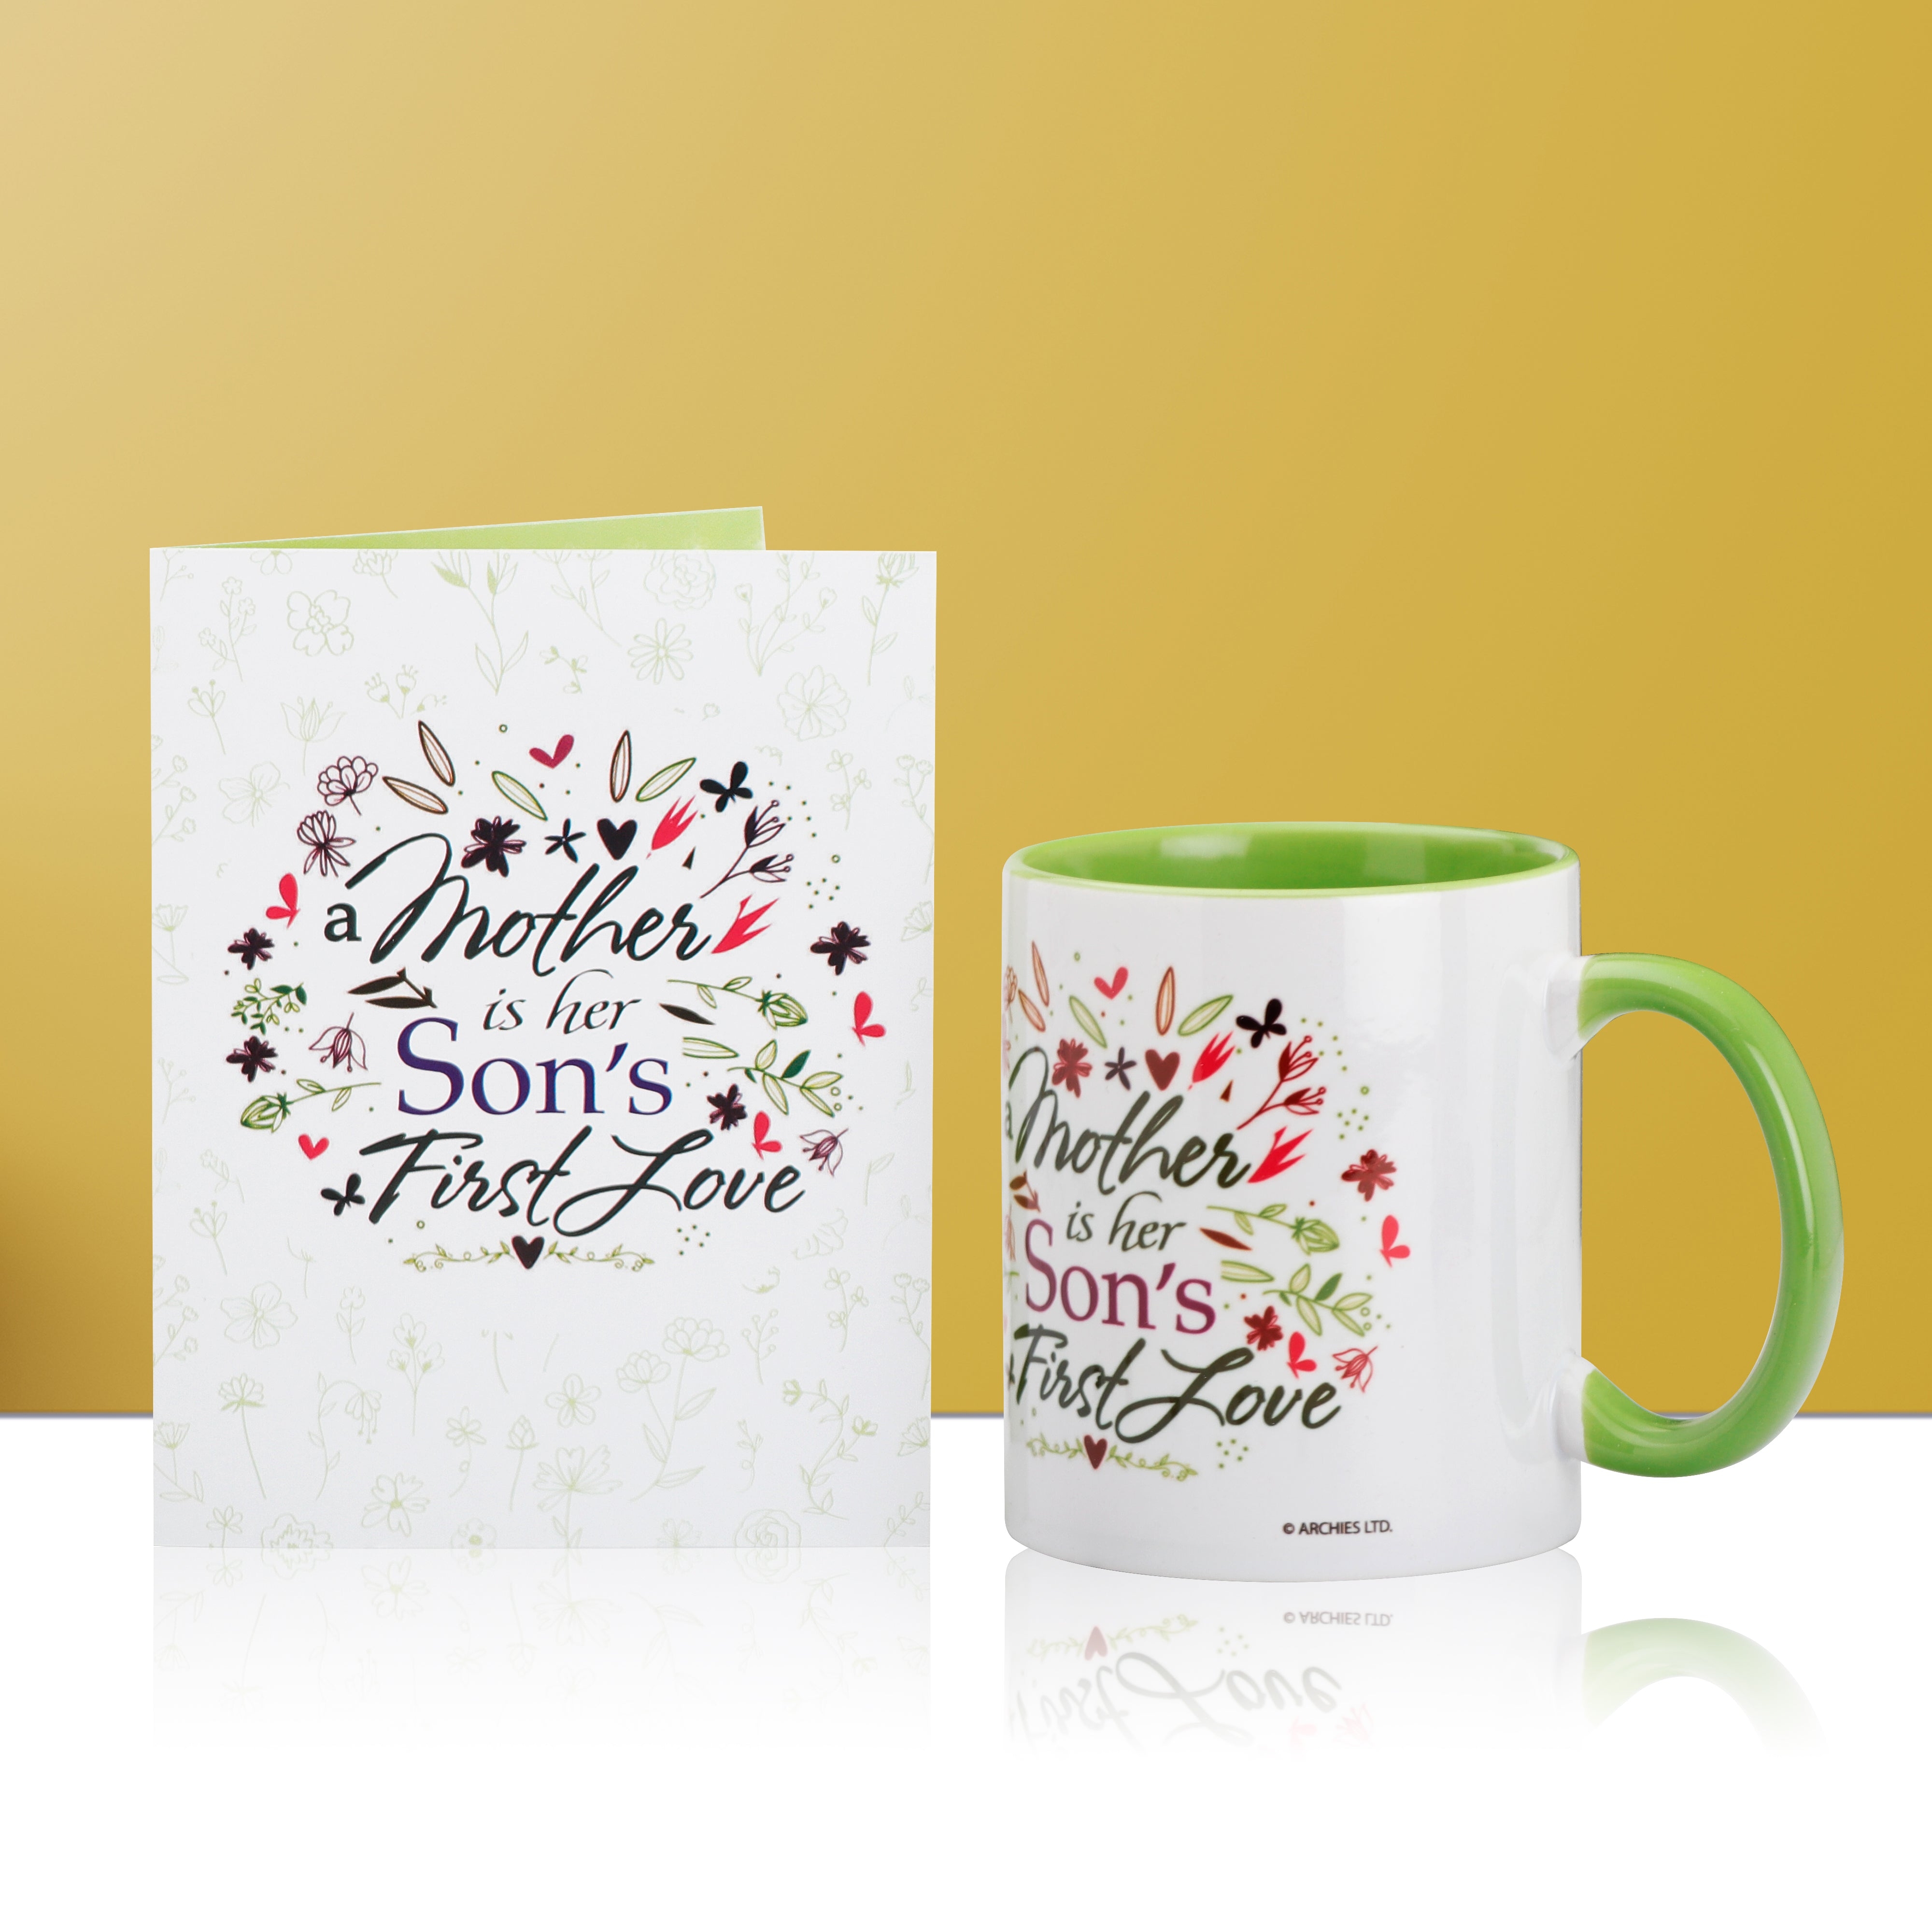 Archies | Archies ceremic "Mother is her Son first Love" Cofee mug with mini greeting card for gifting